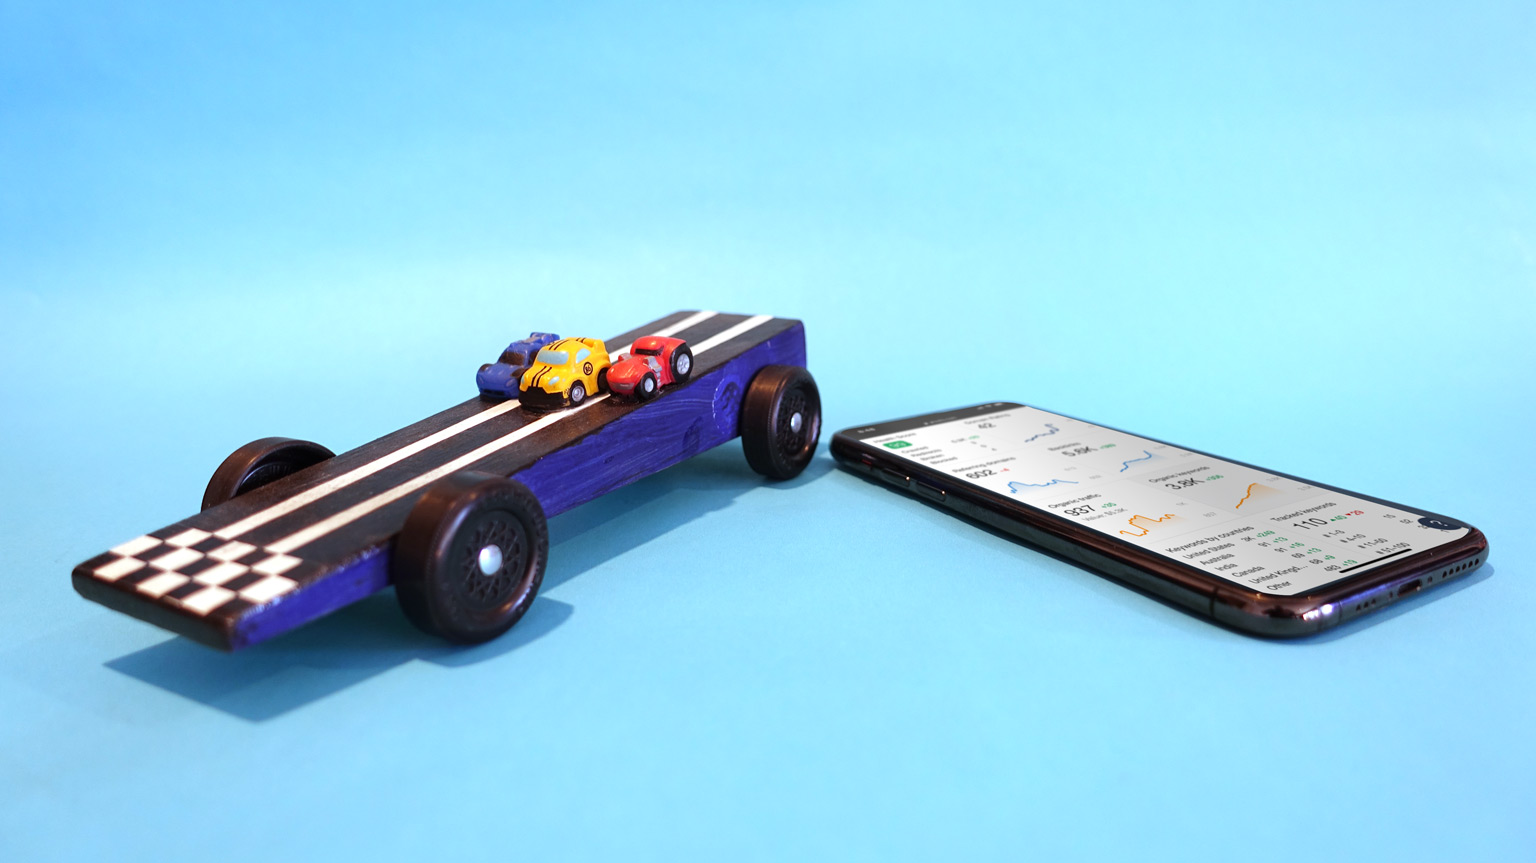 A pinewood derby car and seo software on a mobile phone.